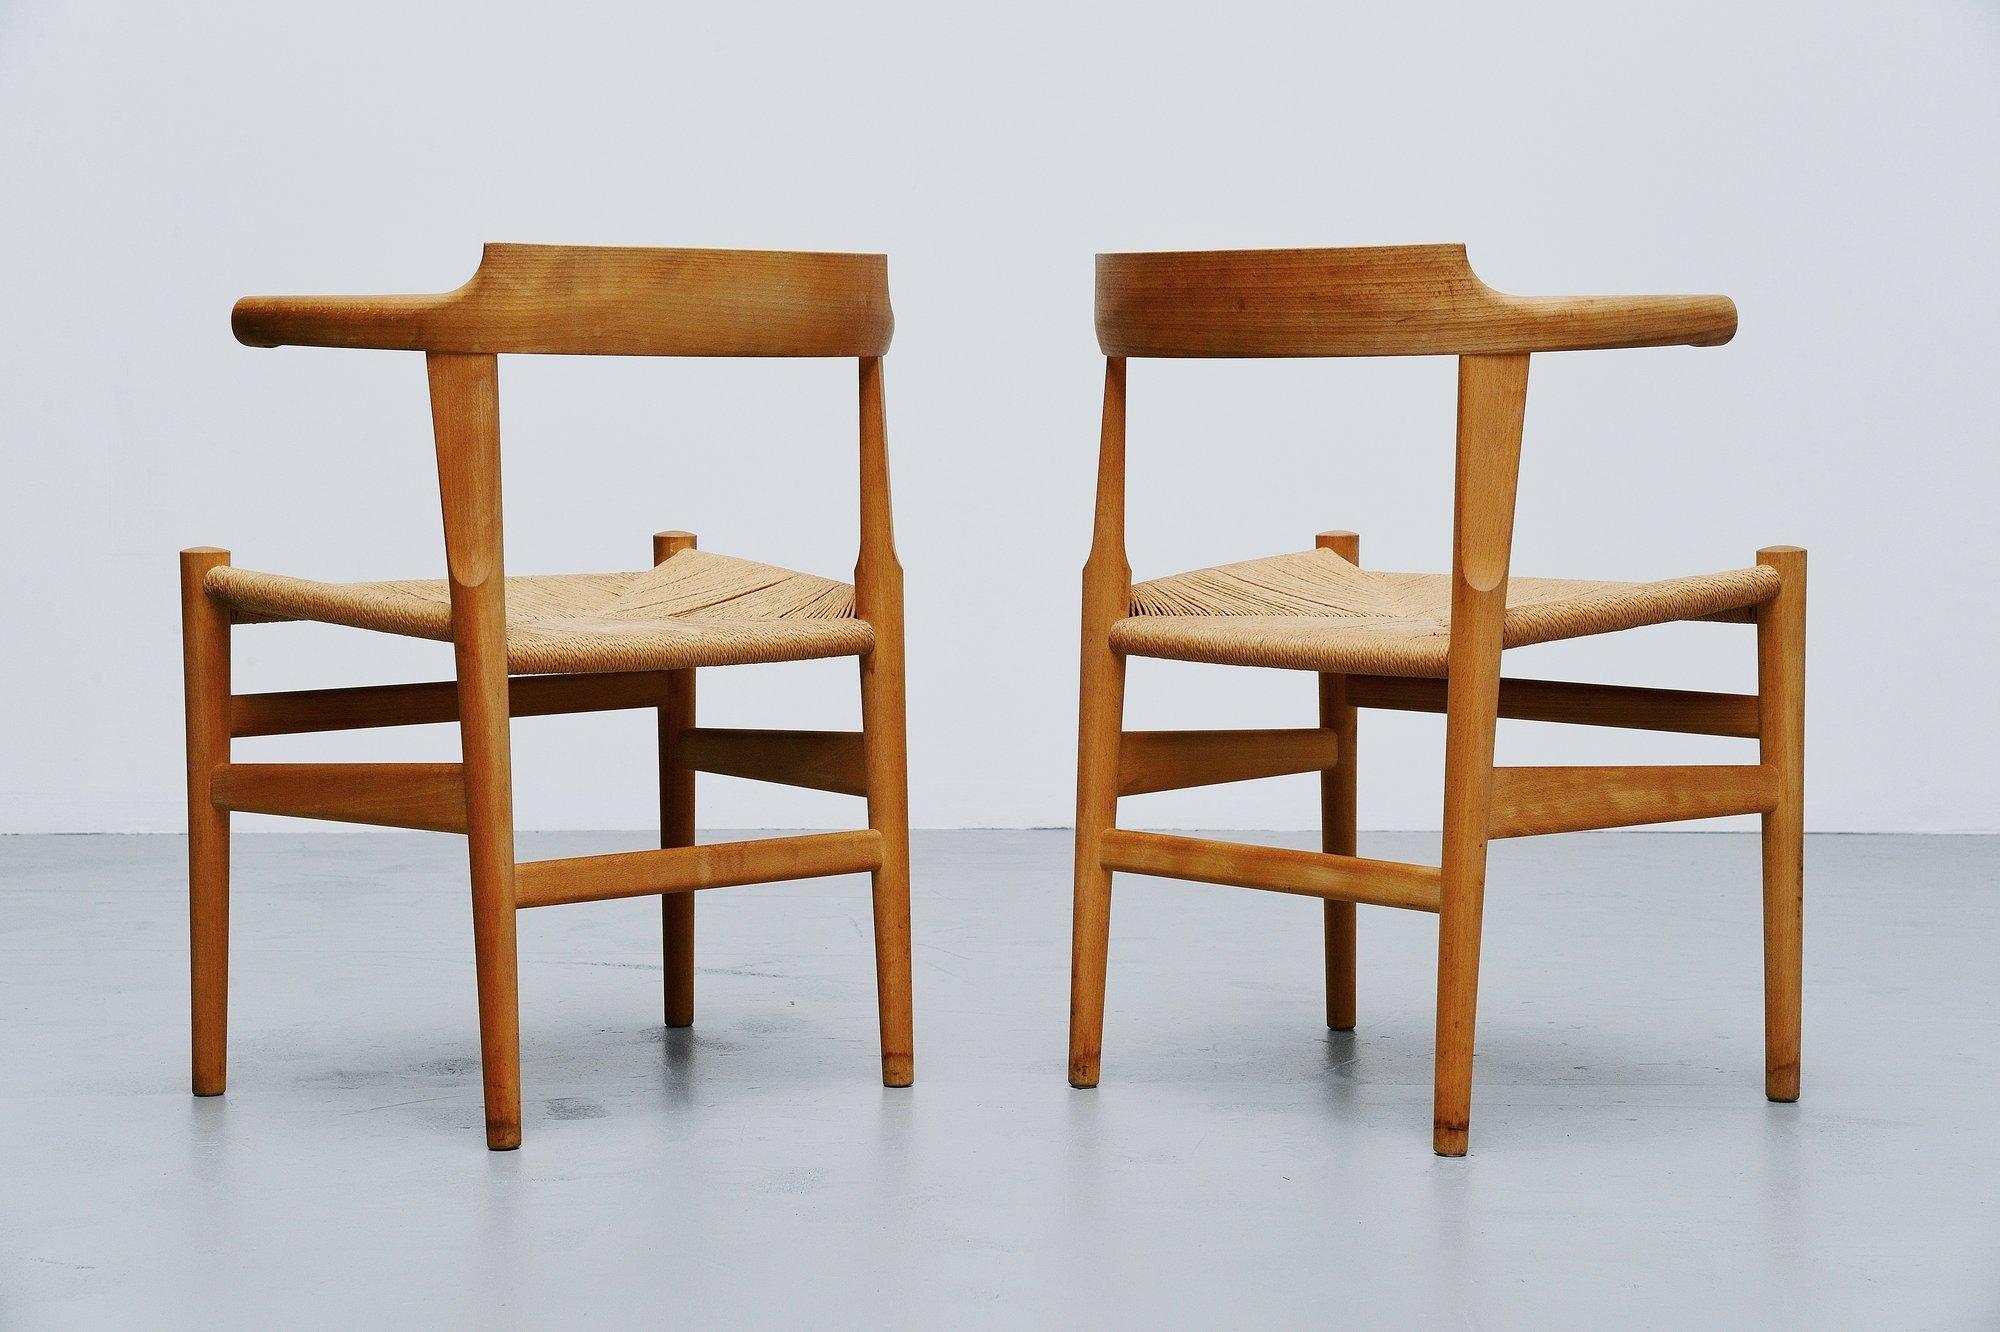 Pair of elbow chairs model PP68 designed by Hans J. Wegner for PP Møbler, Denmark, 1987. The chairs are made of solid oak wood and have a papercord seat. The chairs are in original condition, have some wear from age and usage at the legs. Very rare